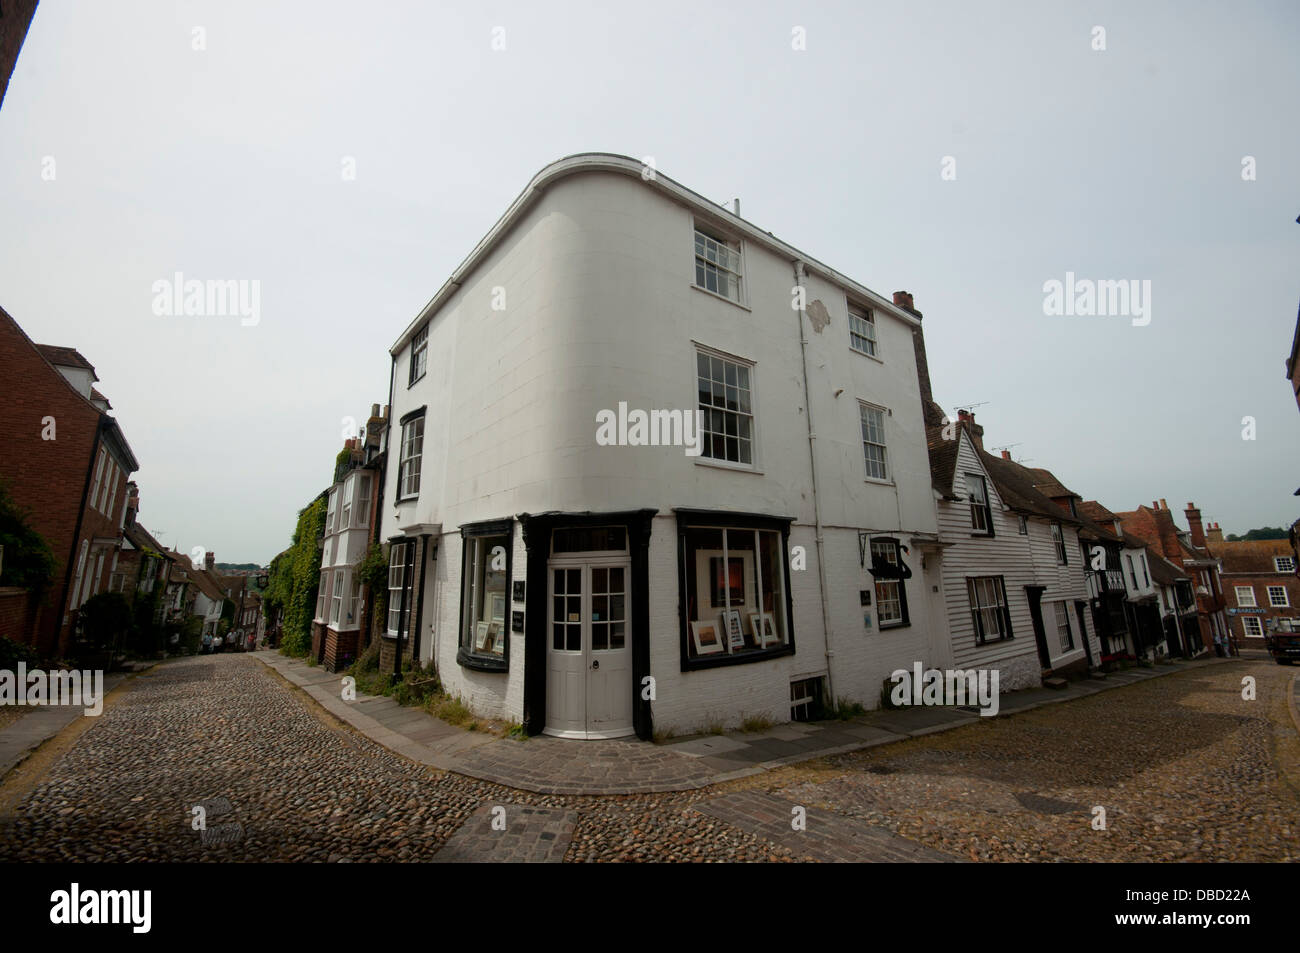 Rye east Sussex coastal cinque port ancient medieval town. Corner of mermaid street and west street Stock Photo